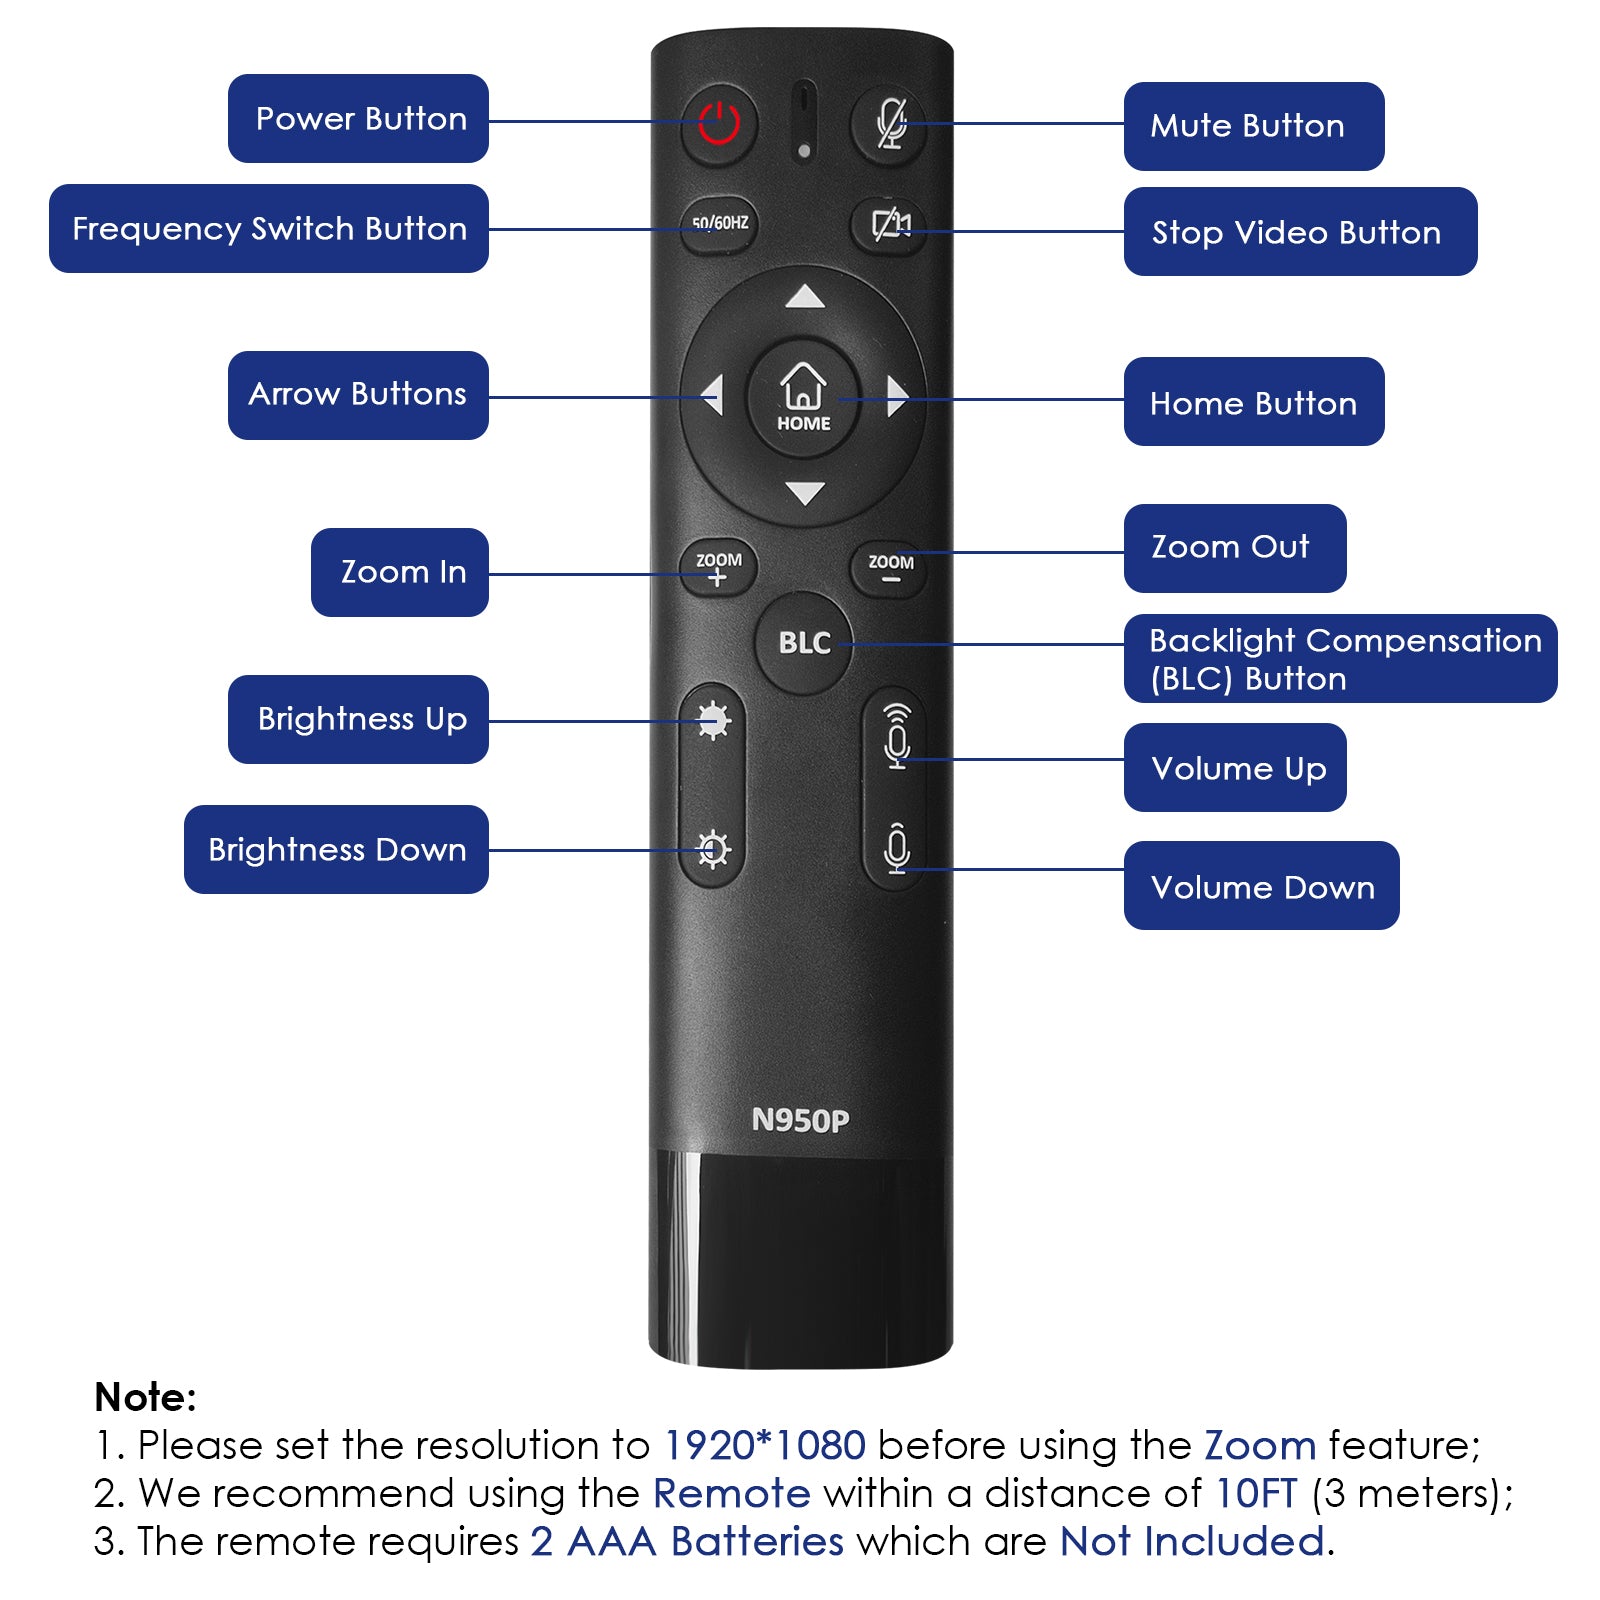 Remote control instructions, such as Power Button, Frequency Switch Button, Arrow Buttons, etc